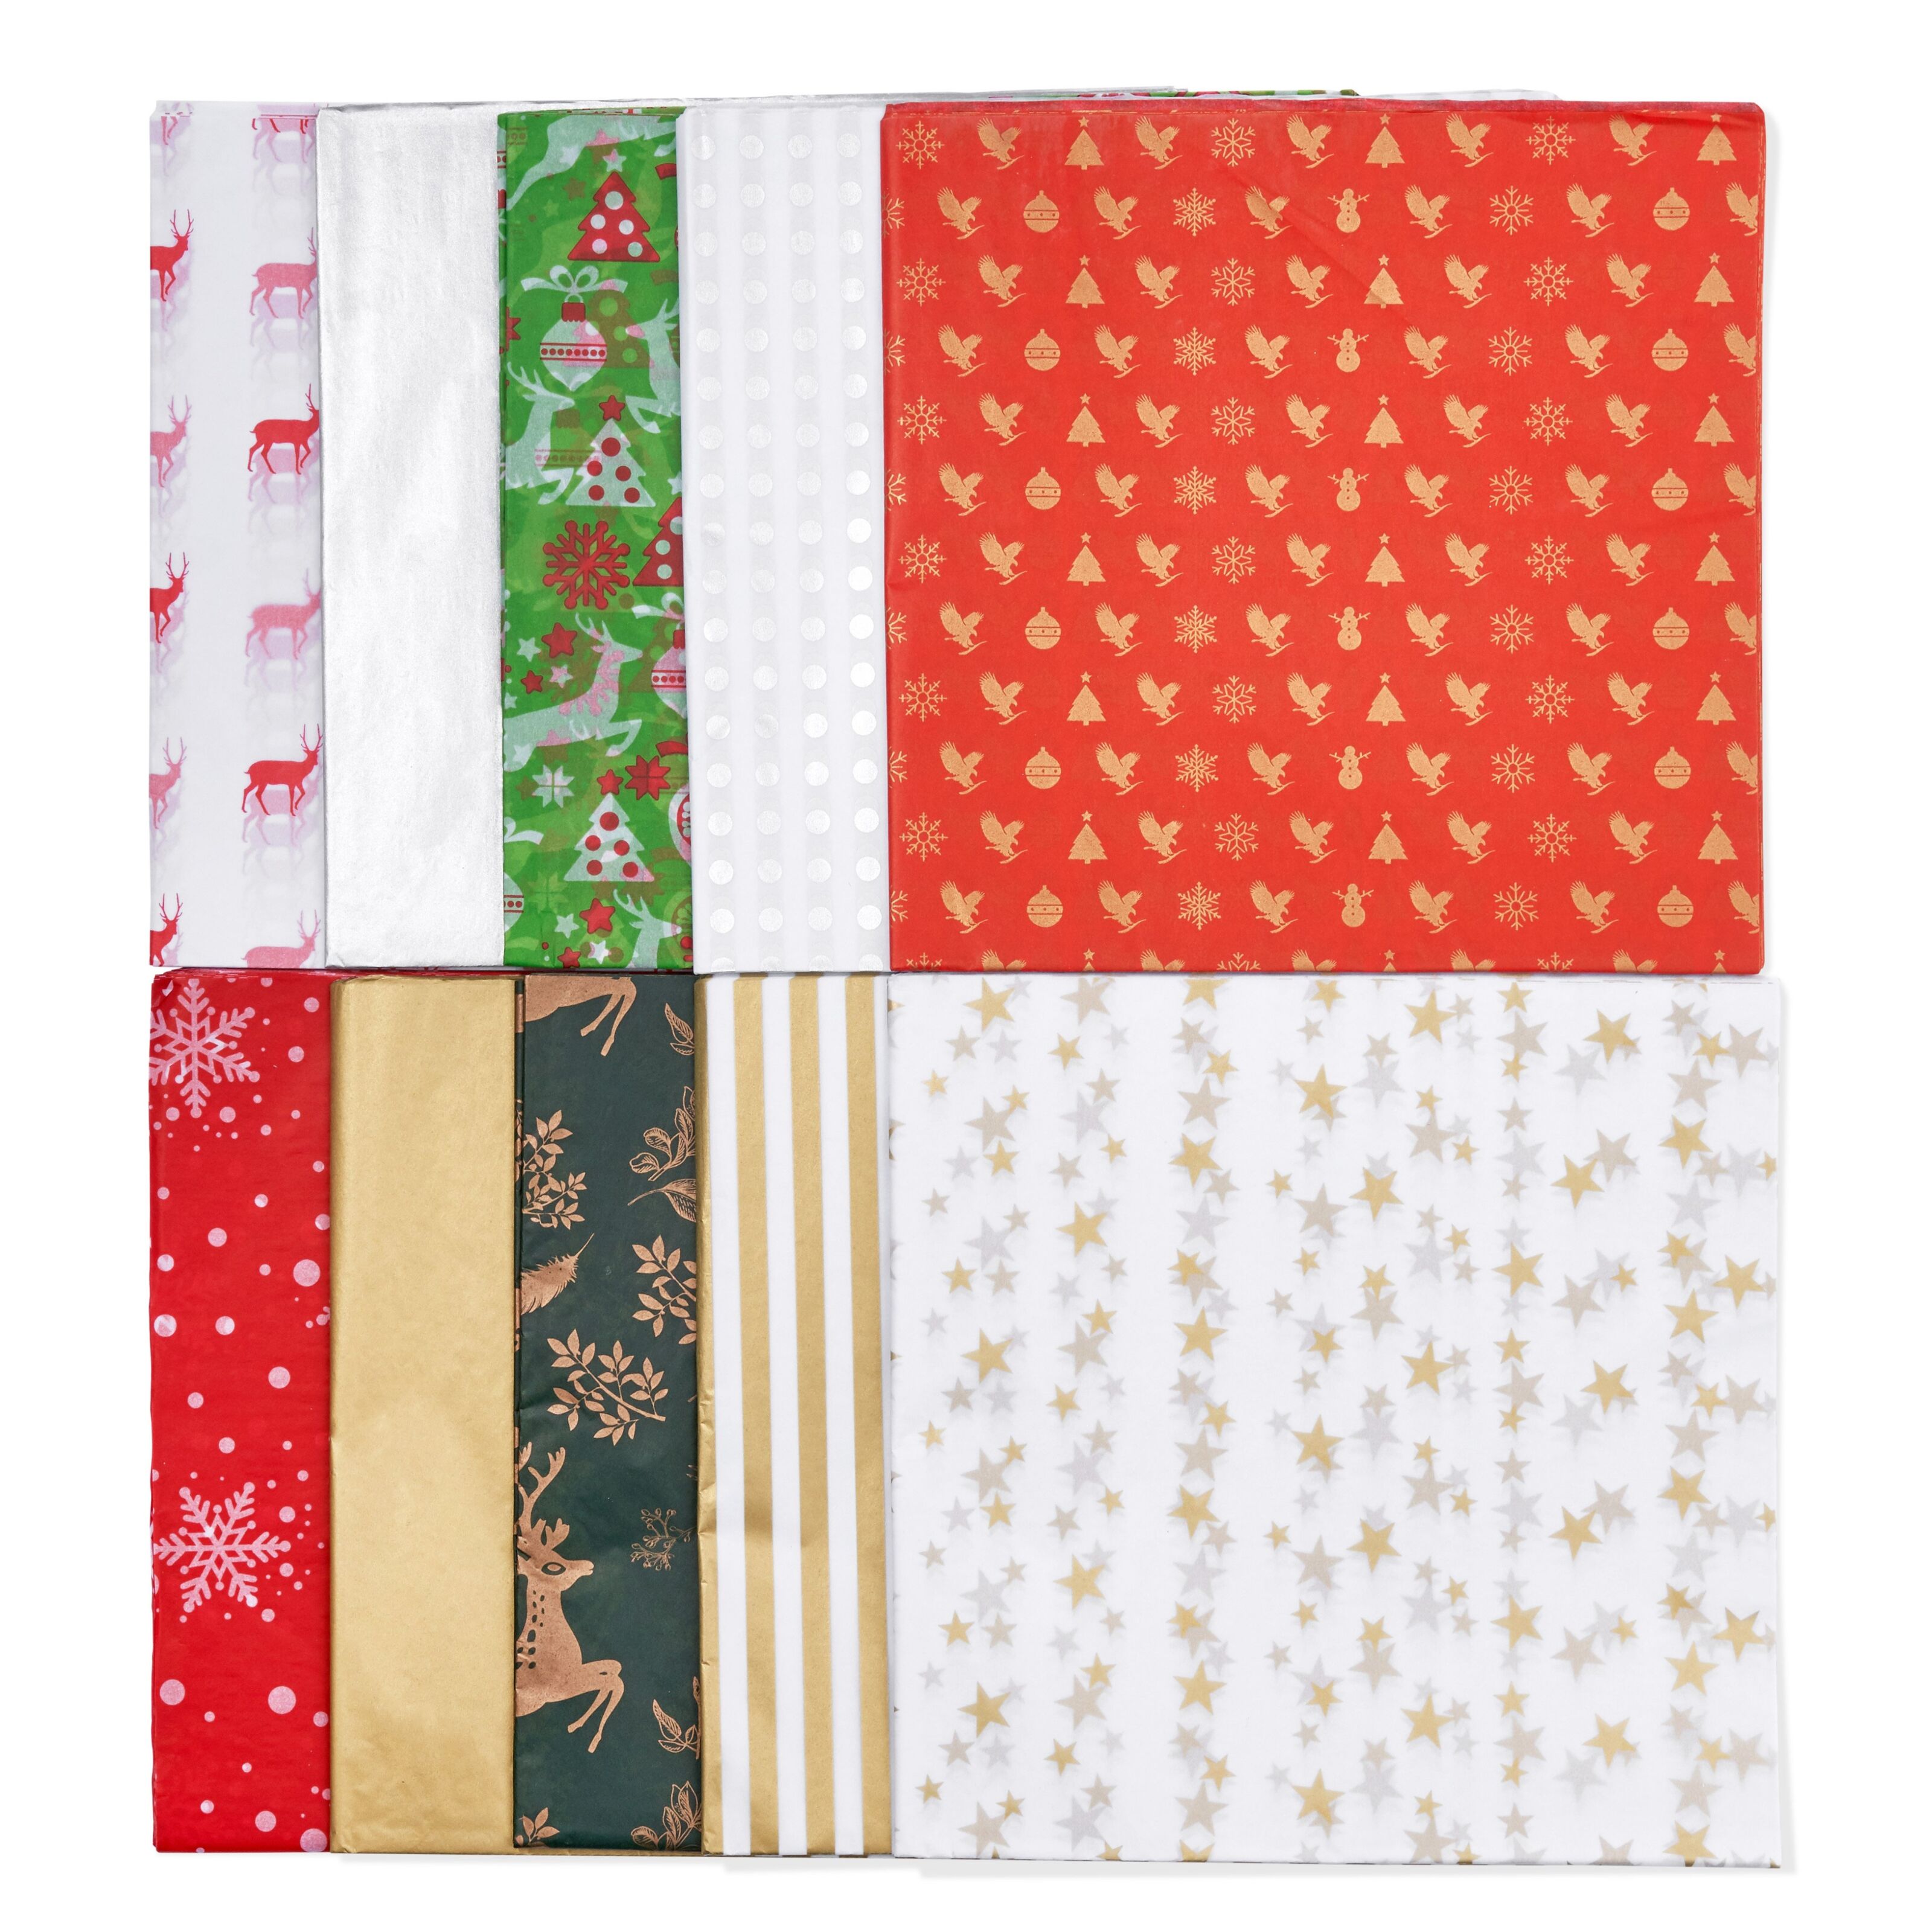 Yardwe 150pcs Christmas Tissue Paper Assortment Wrapper Paper Sheets for Holiday Festival Gift Flower Packaging, As Shown